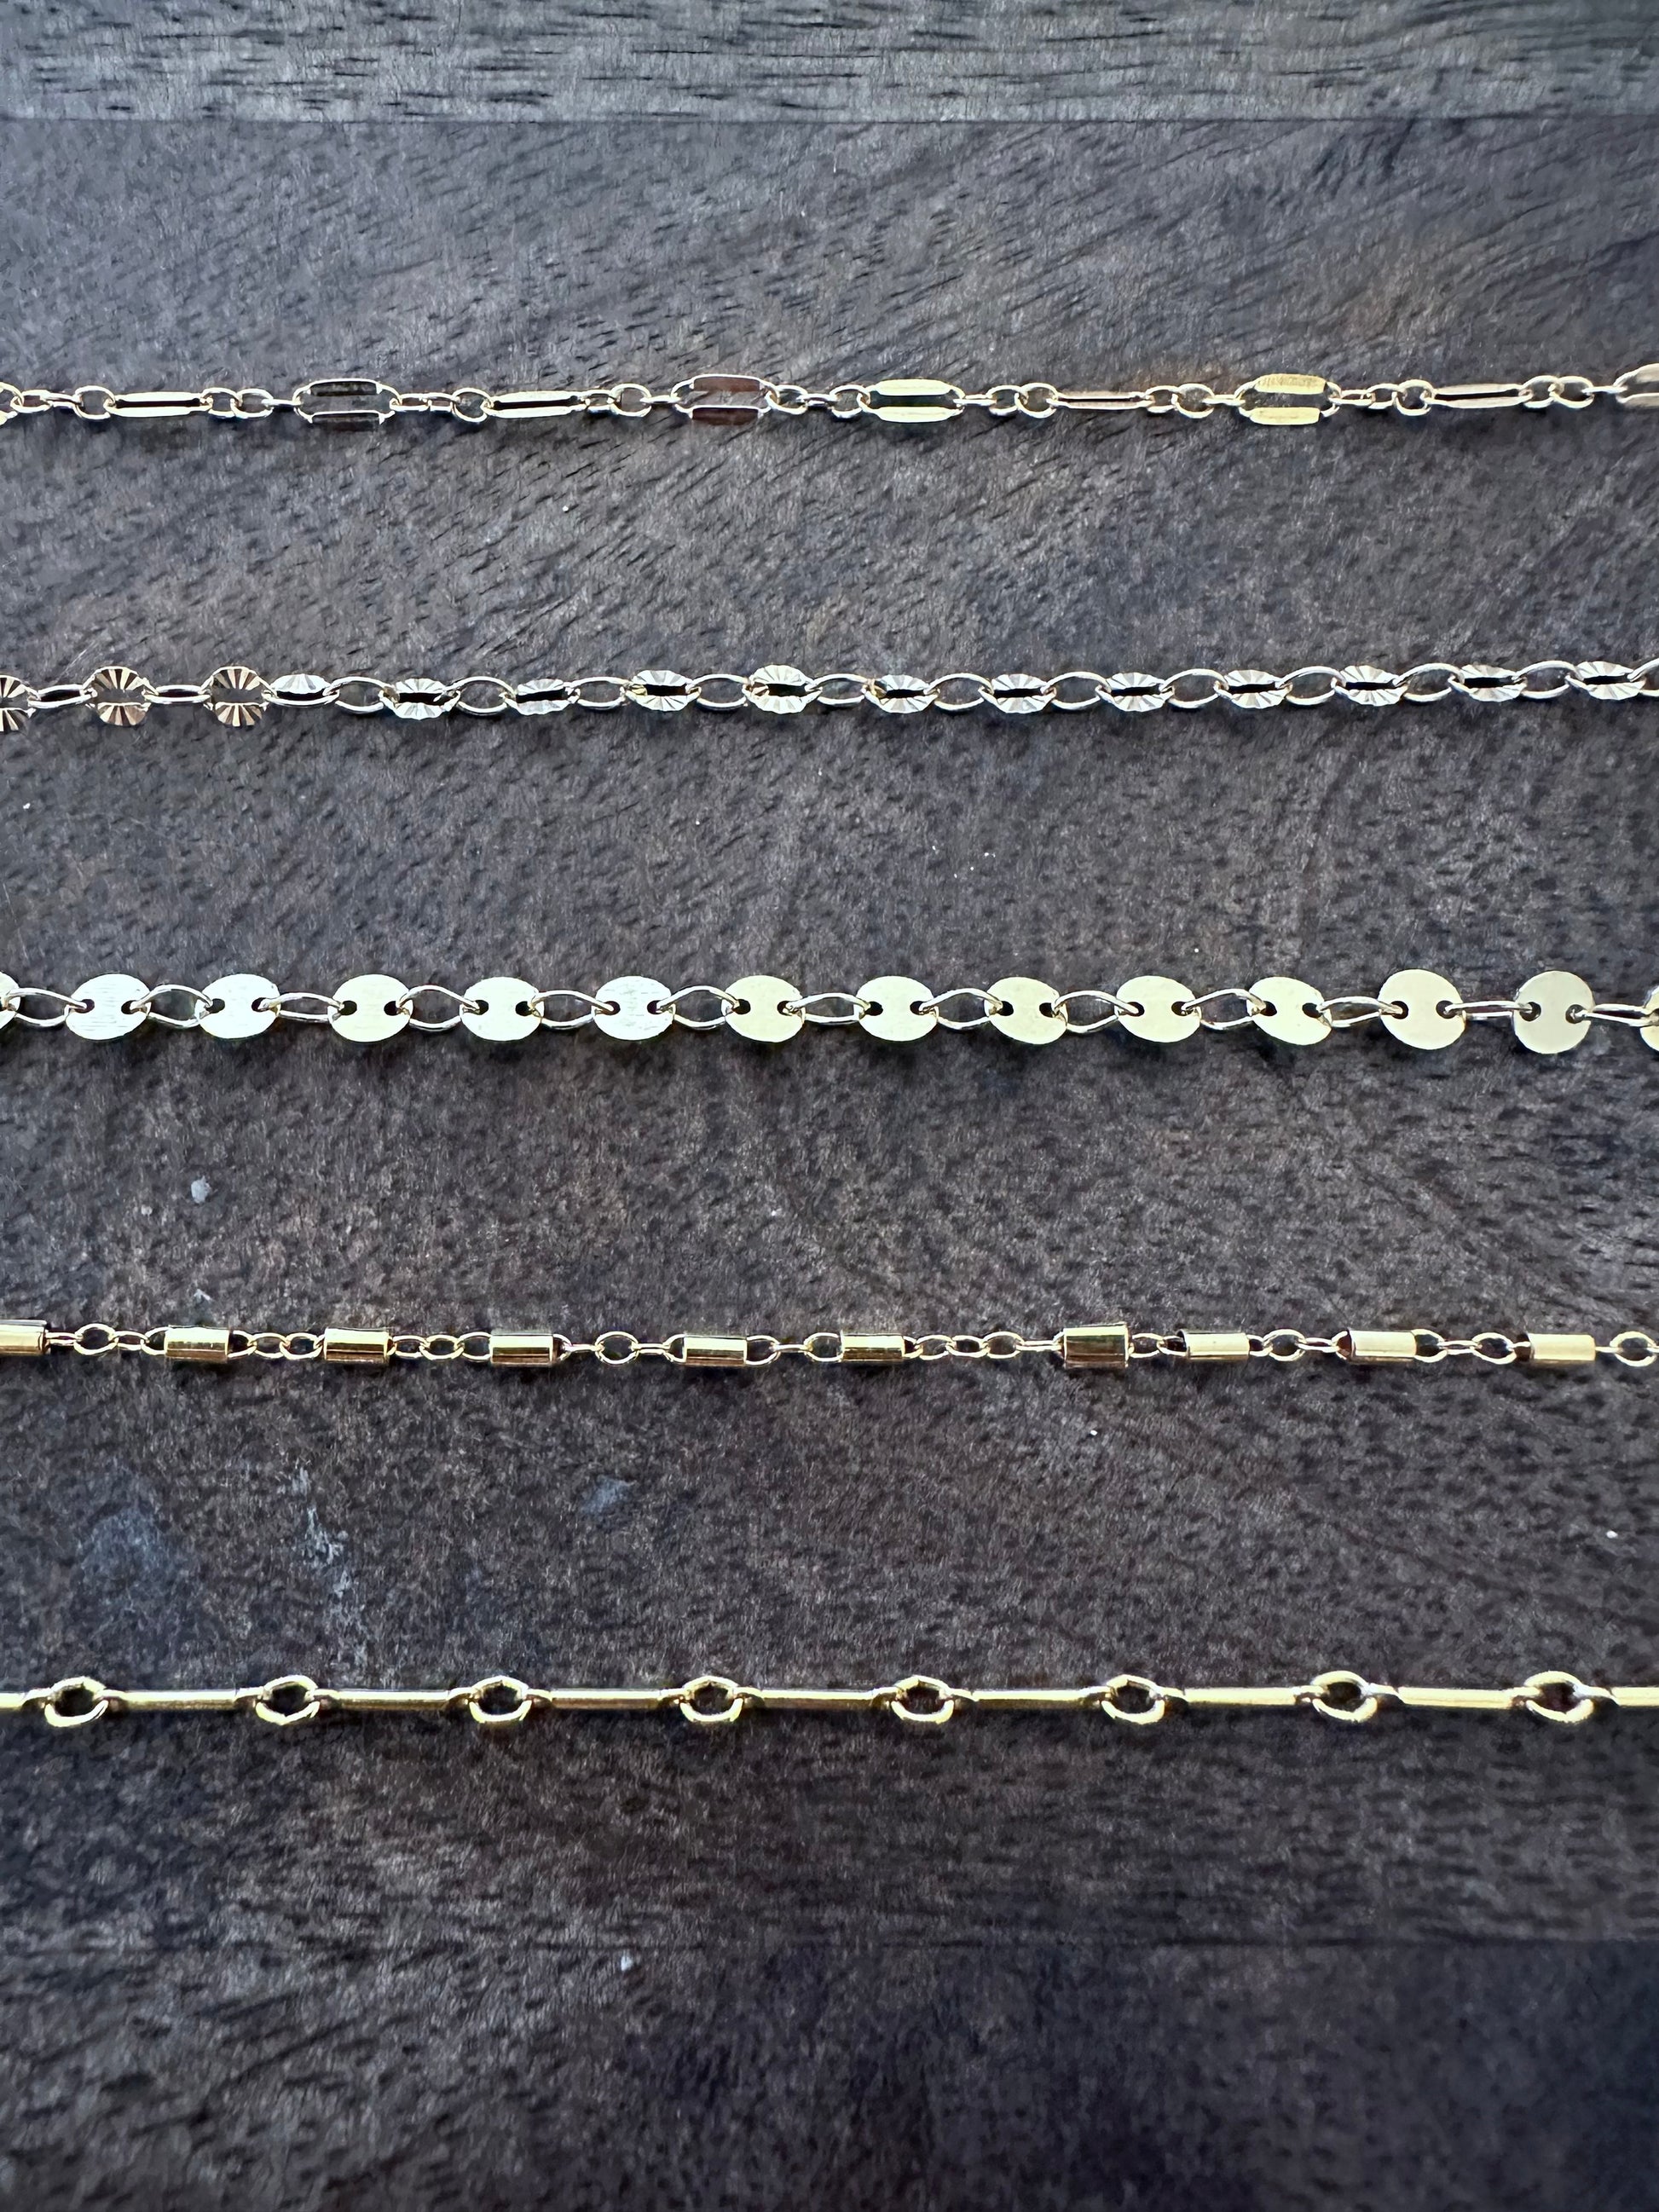 five chaings on a wooden background. the first has flat oval link with two round links connecting it. the oval has a slit int he center. the second chain has alternating round discs with an embosssed pattern and oval links. the third chain is flat round discs alternating wiht a twisted oval link. the fourth is a tube of gold linked by three small round links. the fifth is one long bar linked with small ovals.